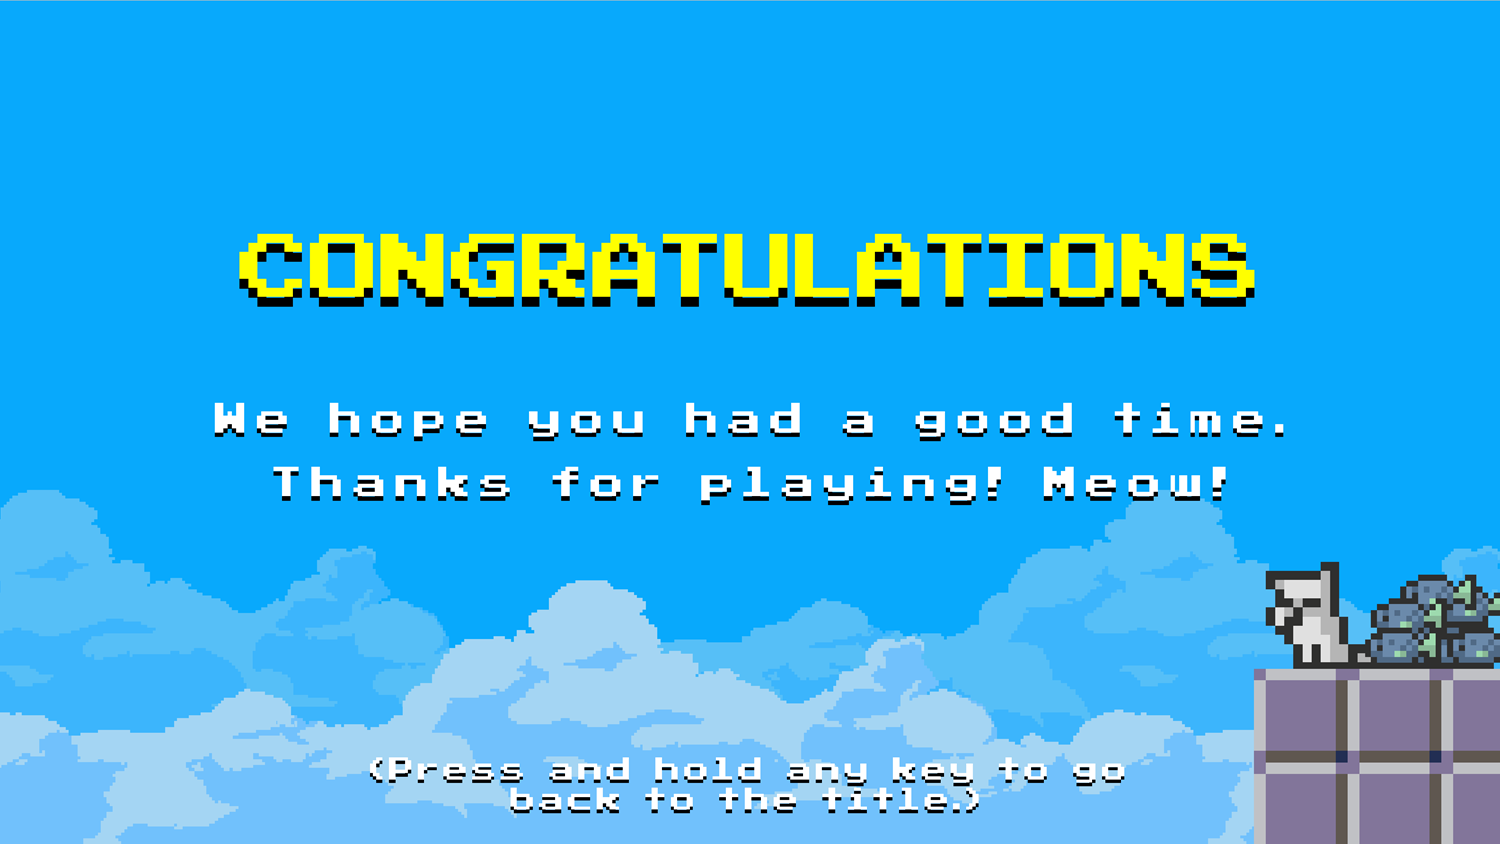 Paws and Claws Game Beat Screen Screenshot.